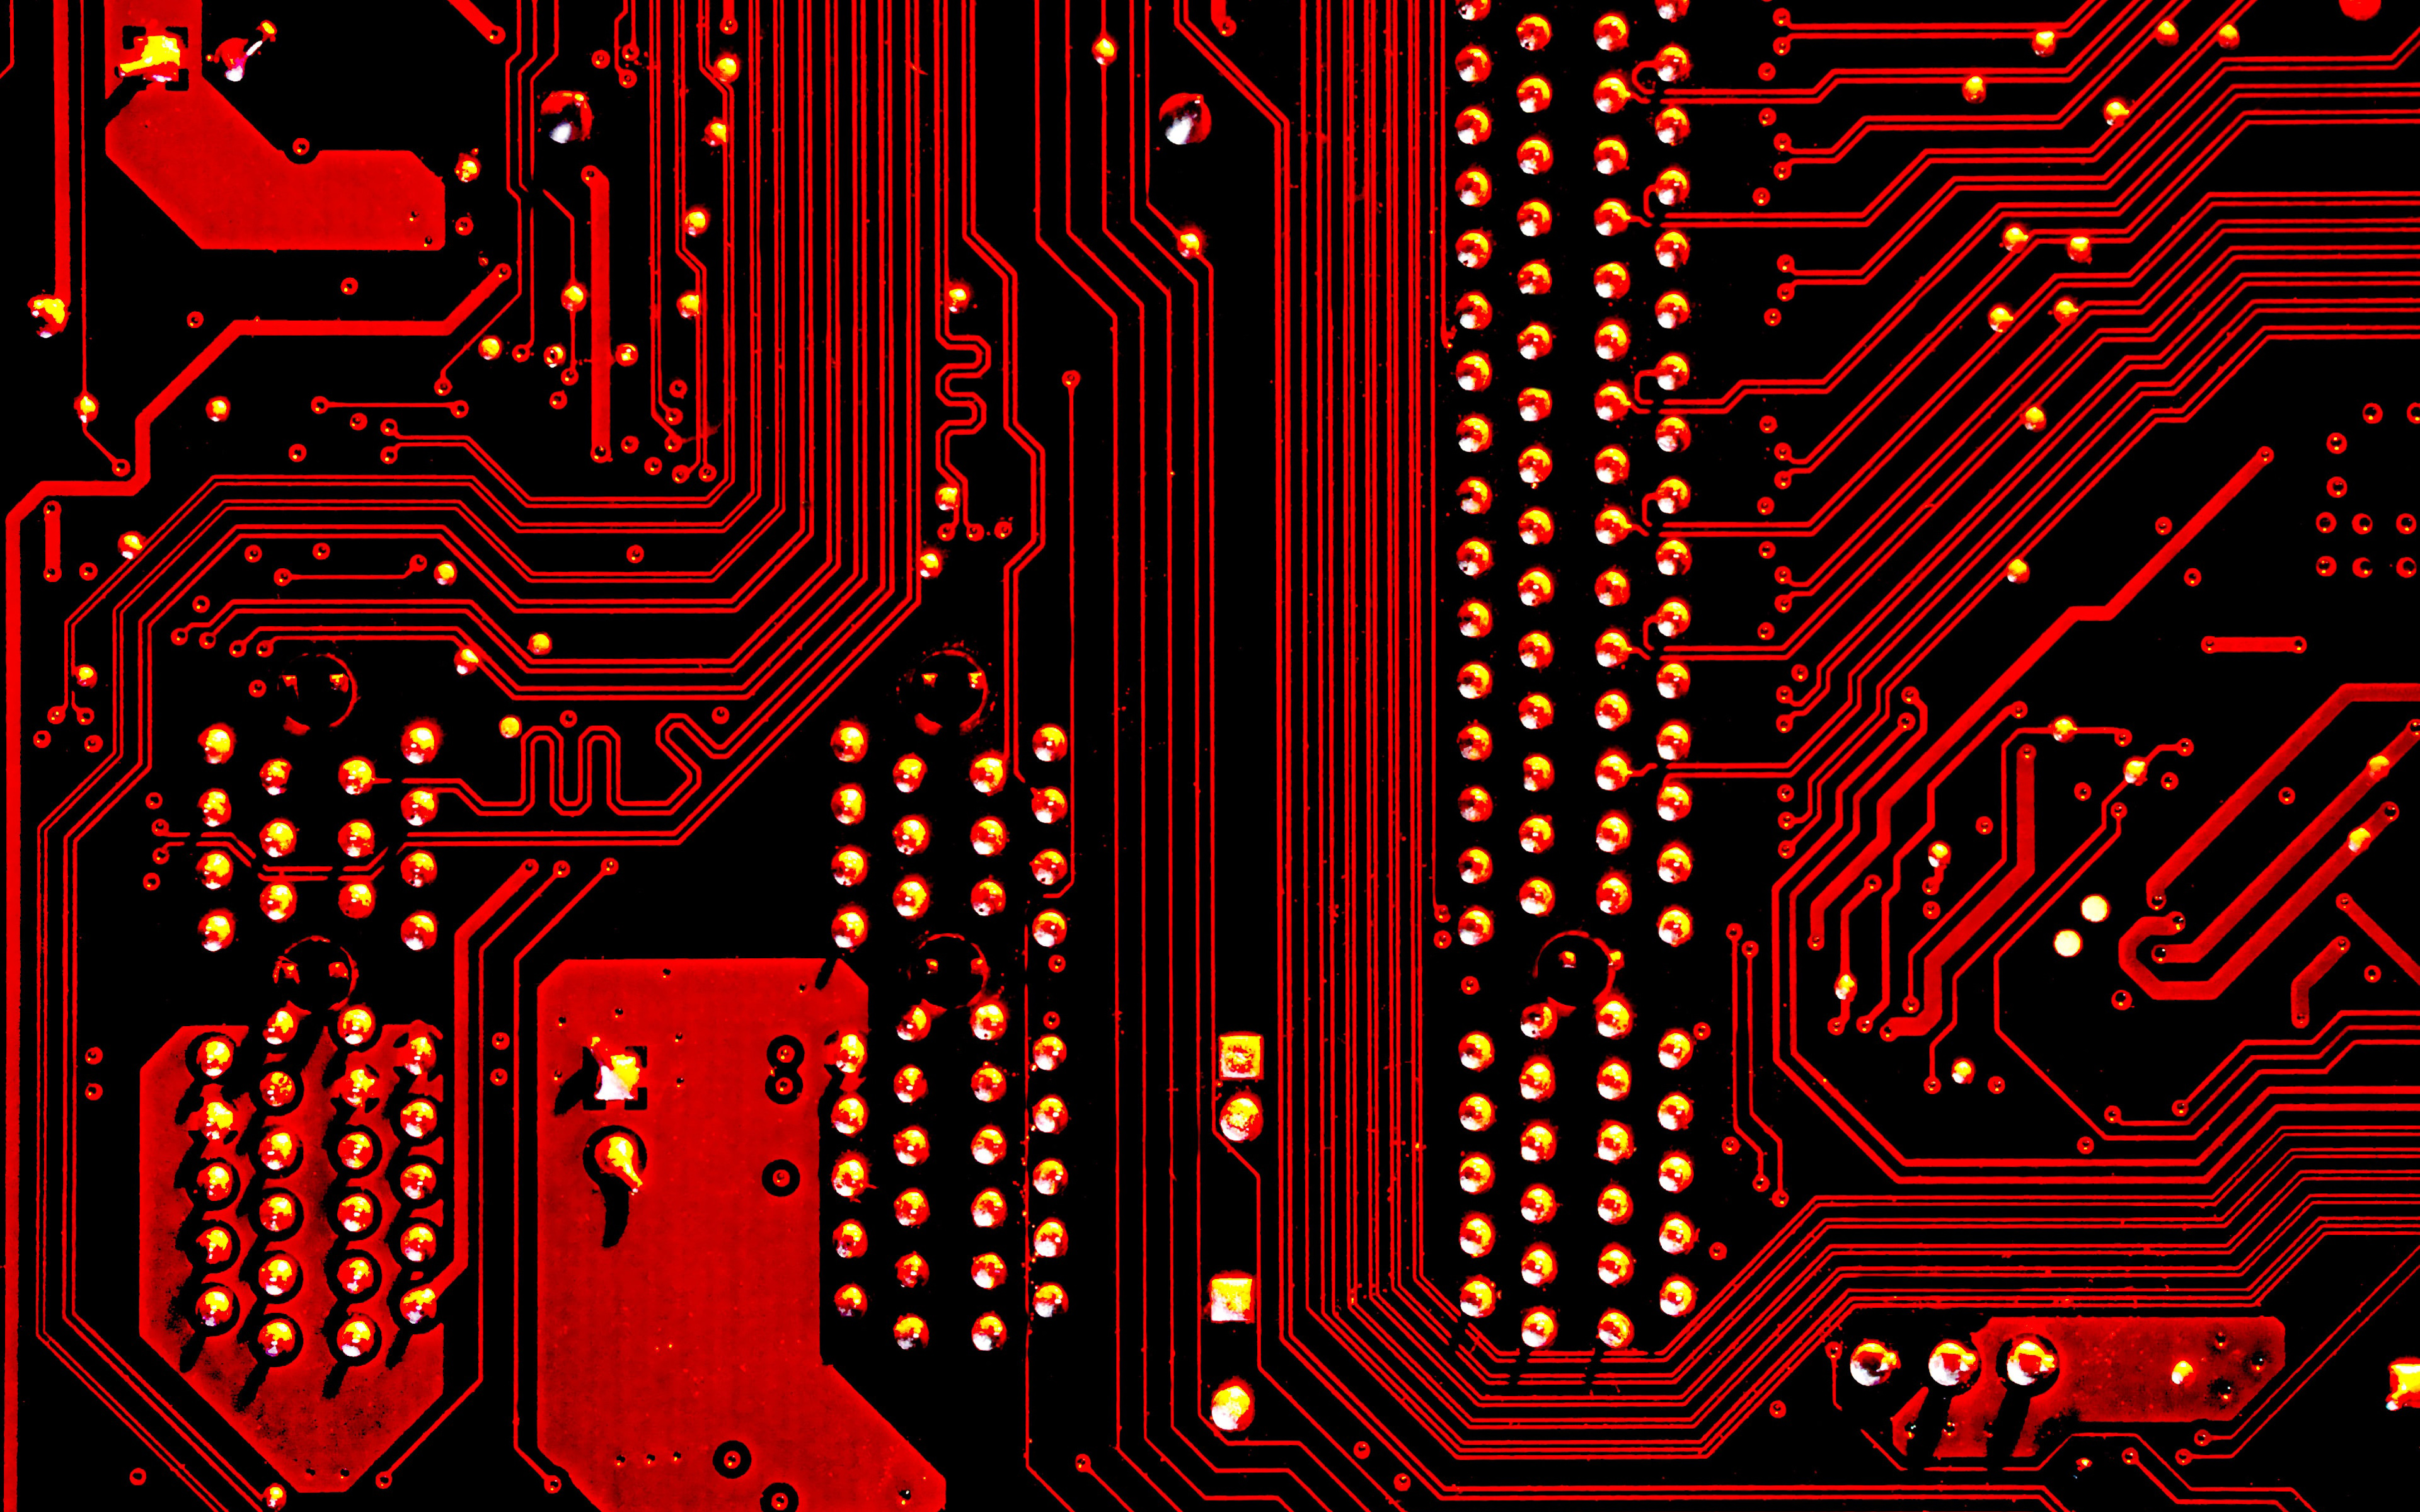 Download wallpaper red circuit board texture, red circuit digital texture, circuit board, red technology background, red circuit board for desktop with resolution 3840x2400. High Quality HD picture wallpaper